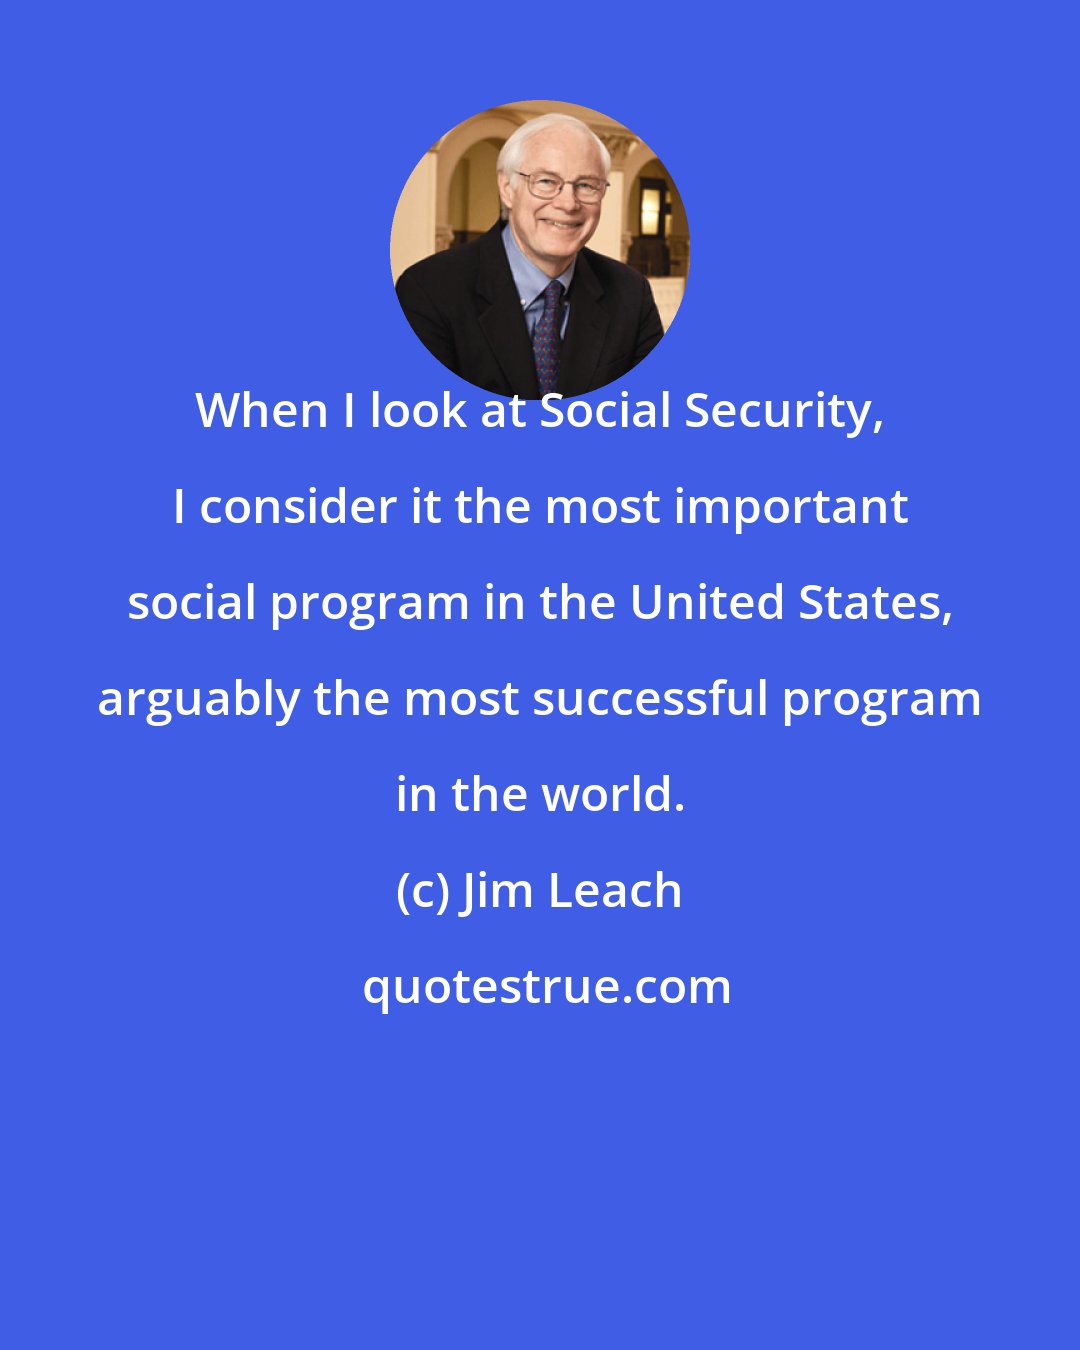 Jim Leach: When I look at Social Security, I consider it the most important social program in the United States, arguably the most successful program in the world.